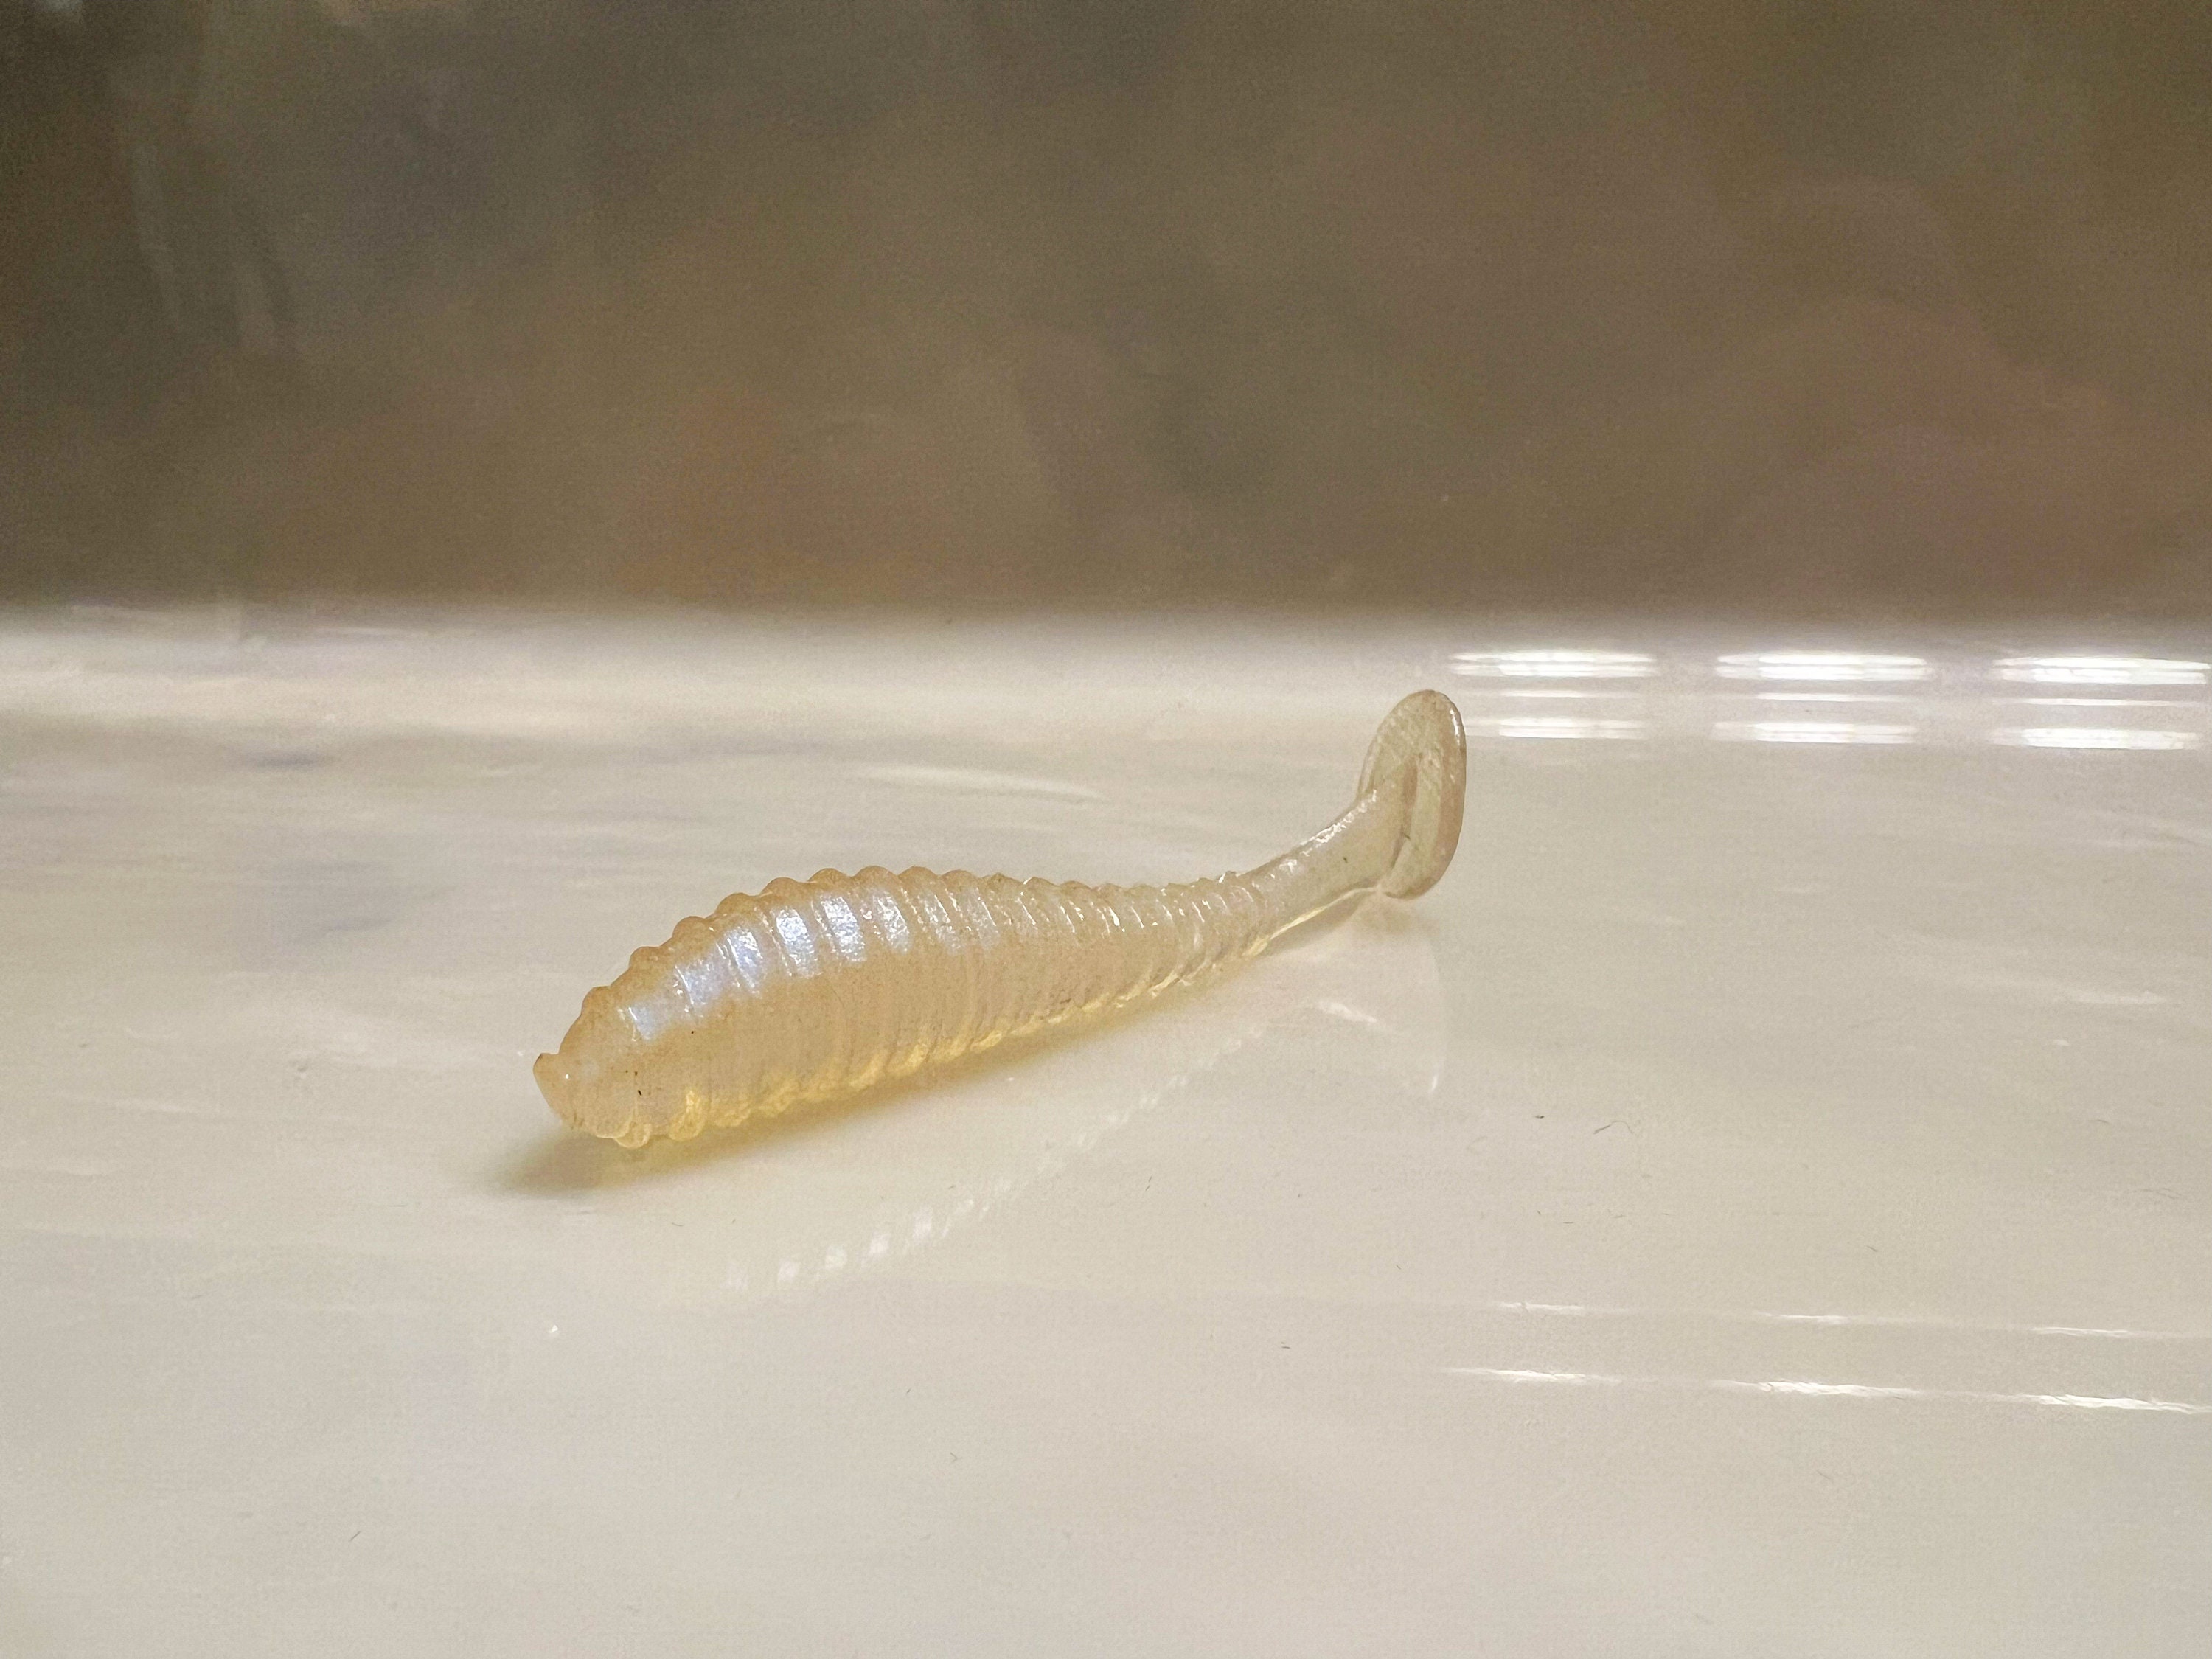 Clear Artificial 3 Inch Ripper Swimbait 